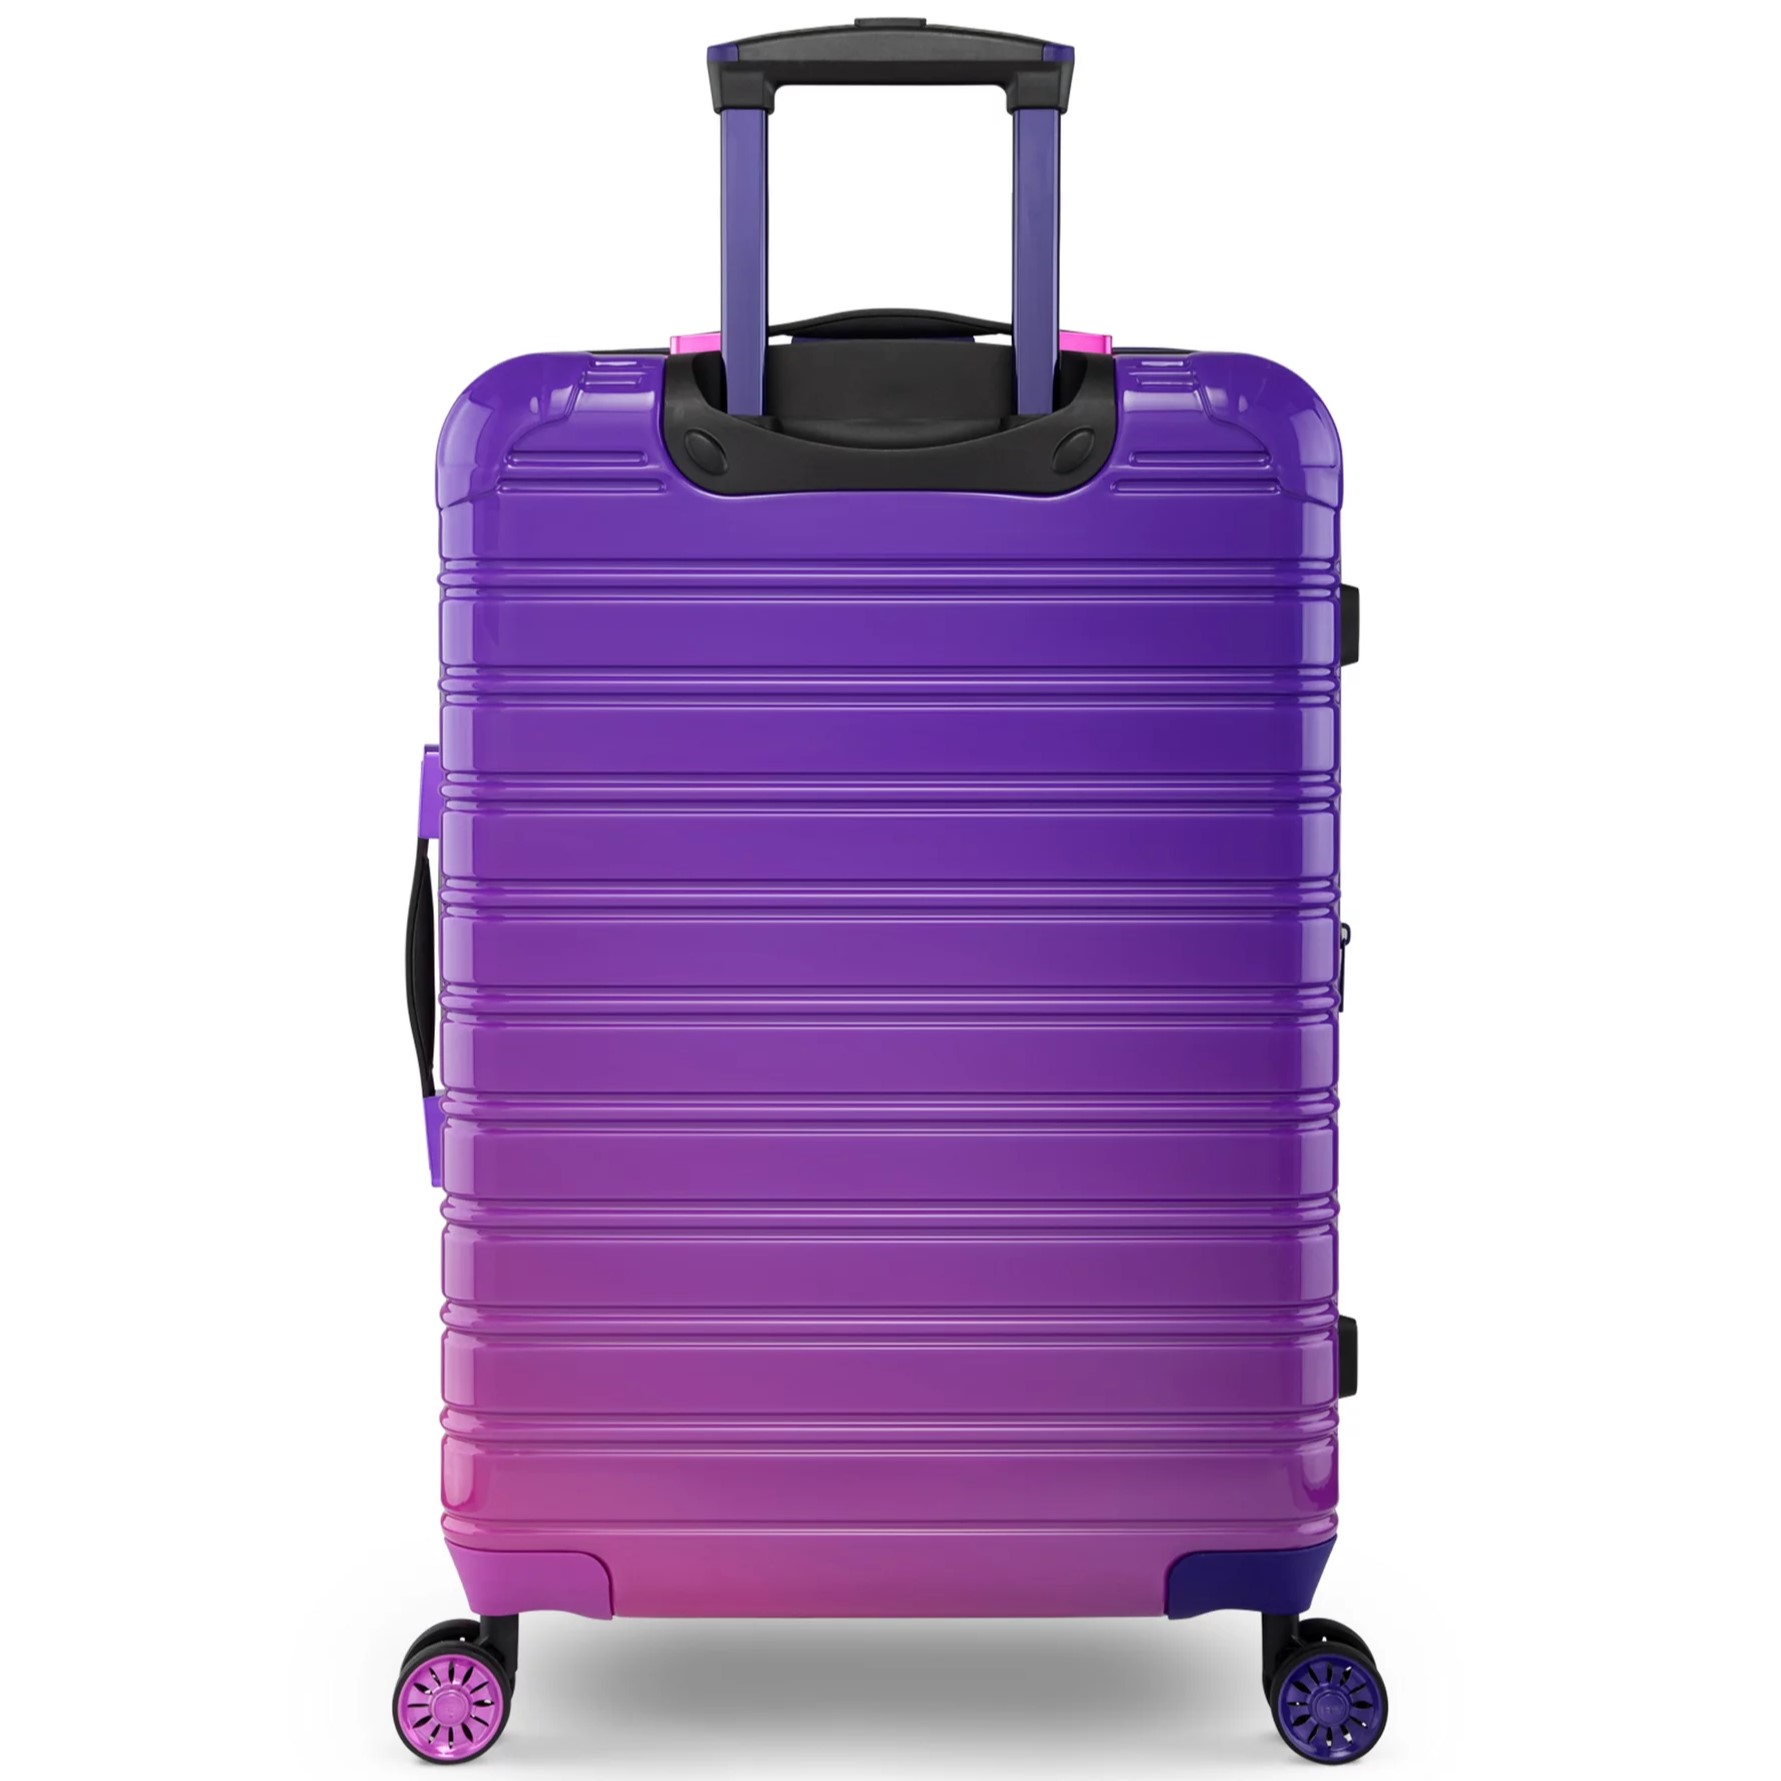 VALI MÀU TÍM LOANG DU LỊCH IFLY FIBERTECH OMBRE HARDSIDE LUGGAGE IN MIDNIGHT BERRY 16